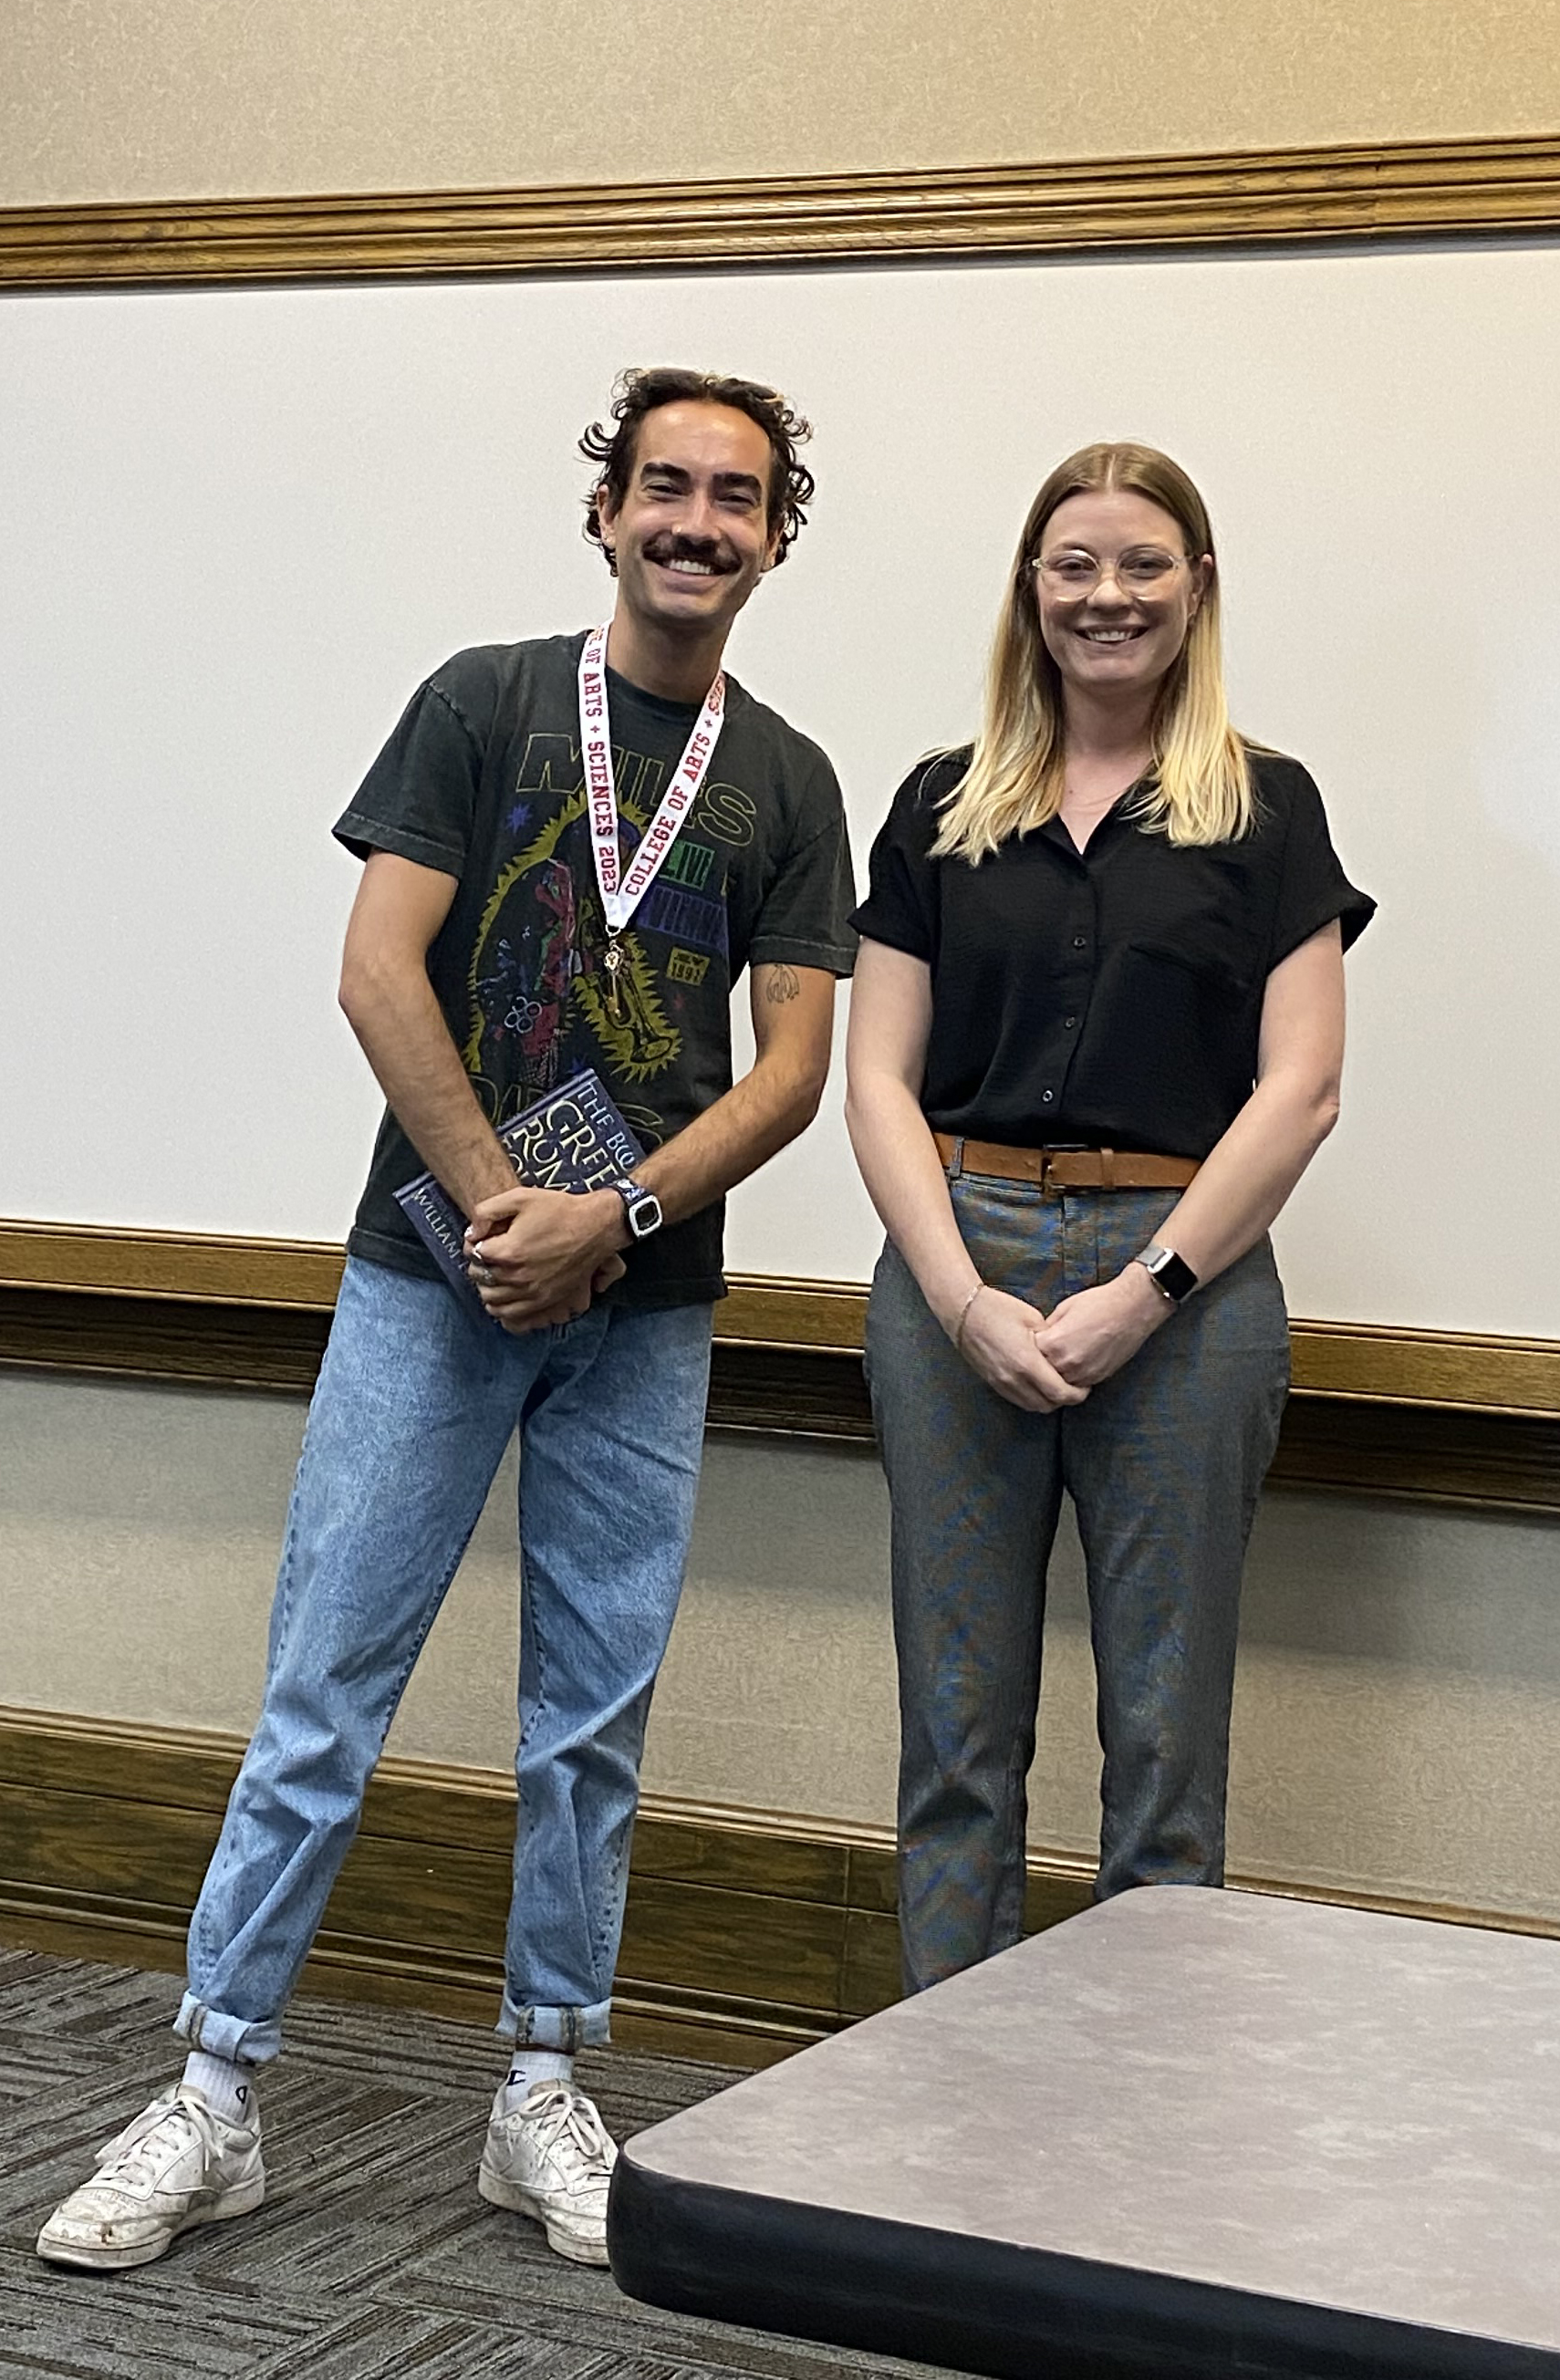 Professor and graduating senior holding a book and wearing a lanyard, smiling at the camera